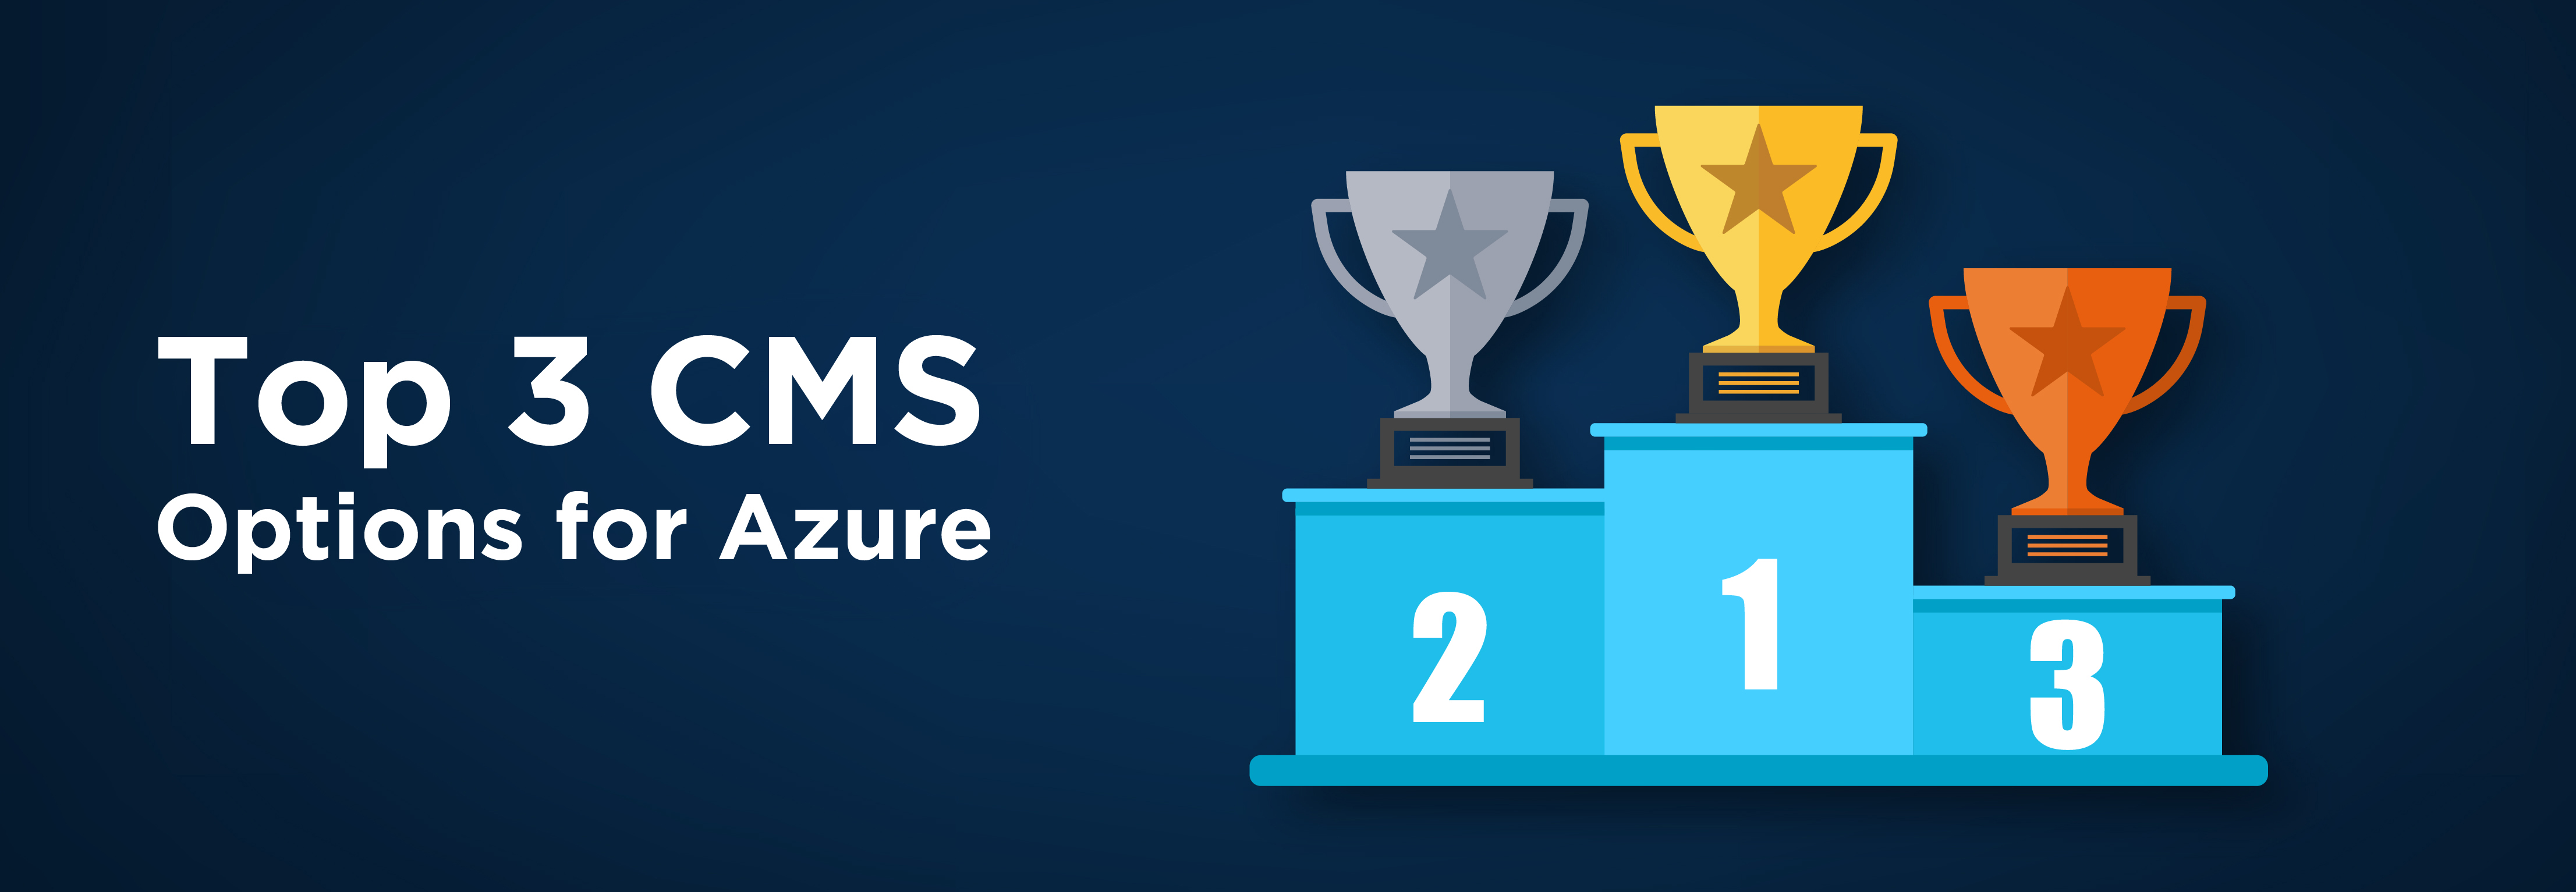 Top 3 CMS for Azure and Active Directory